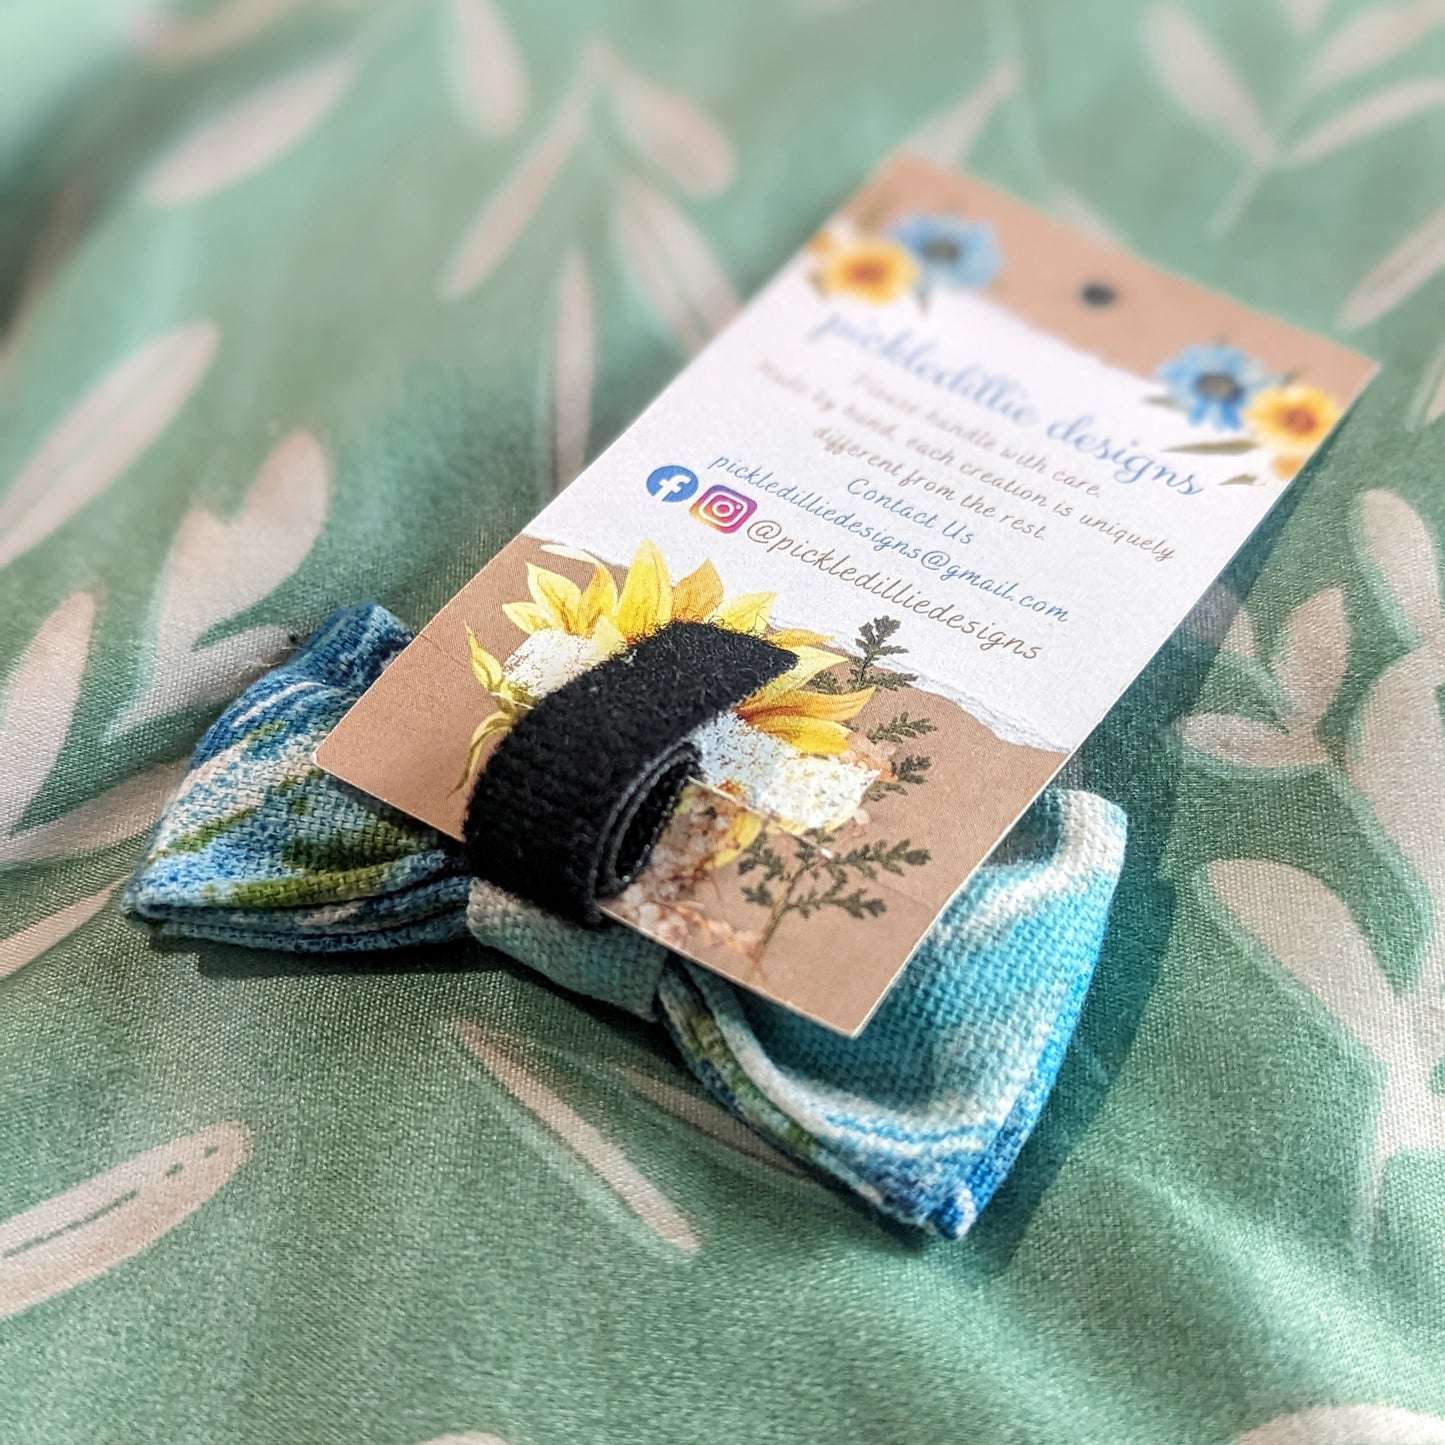 Discover handsewn dog bowties made in Annapolis, Maryland by Pickledillie Designs. Elevate your pet's style with unique cloth pet fashion accessories. Shop small and support local artisans.